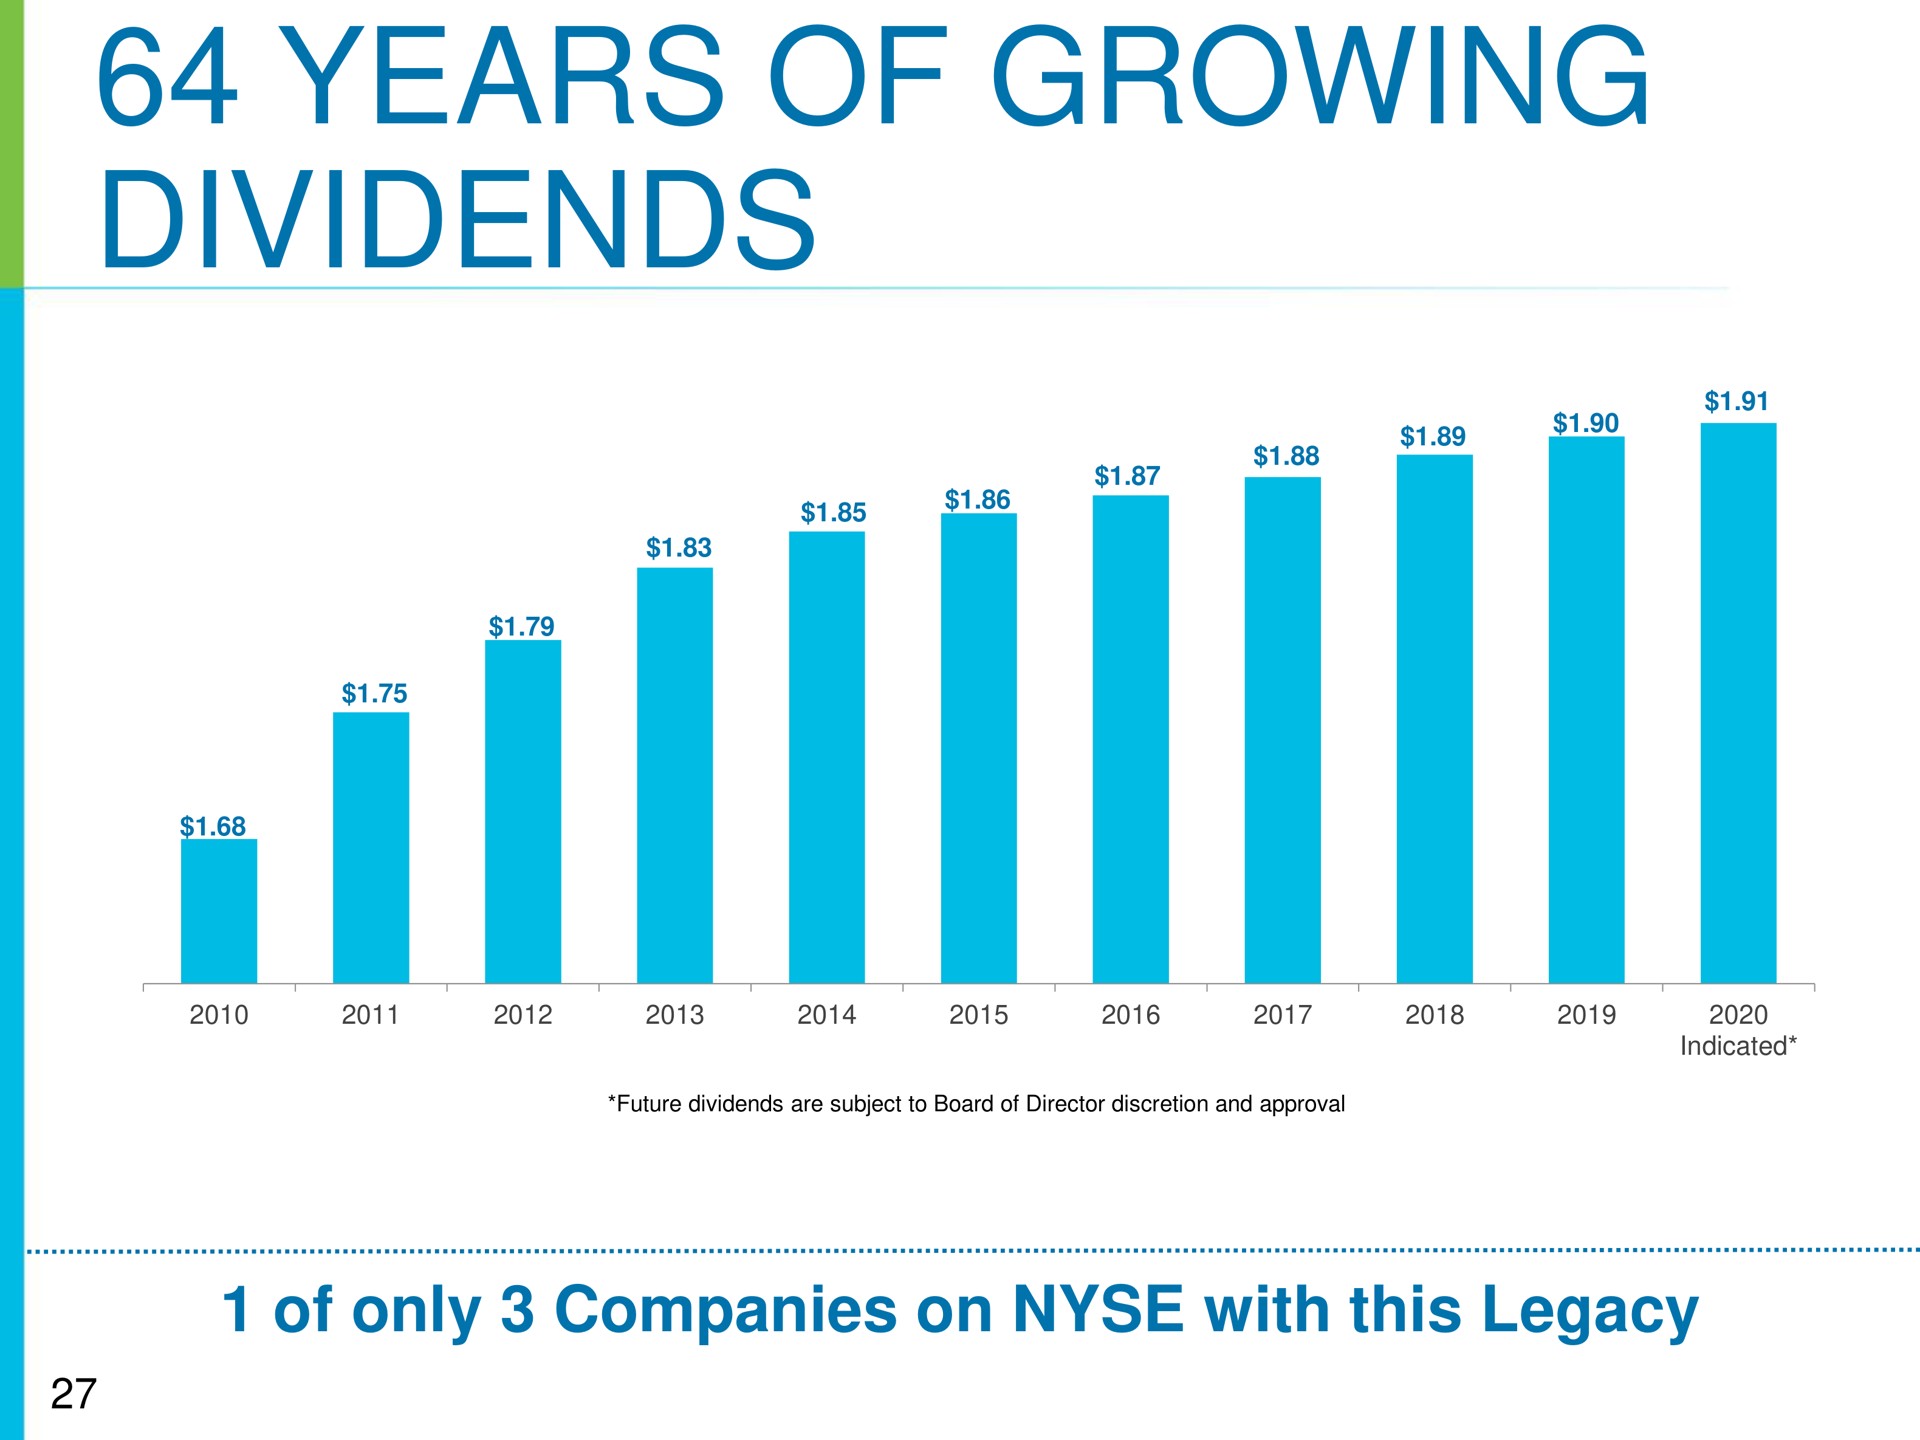 years of growing dividends | NW Natural Holdings